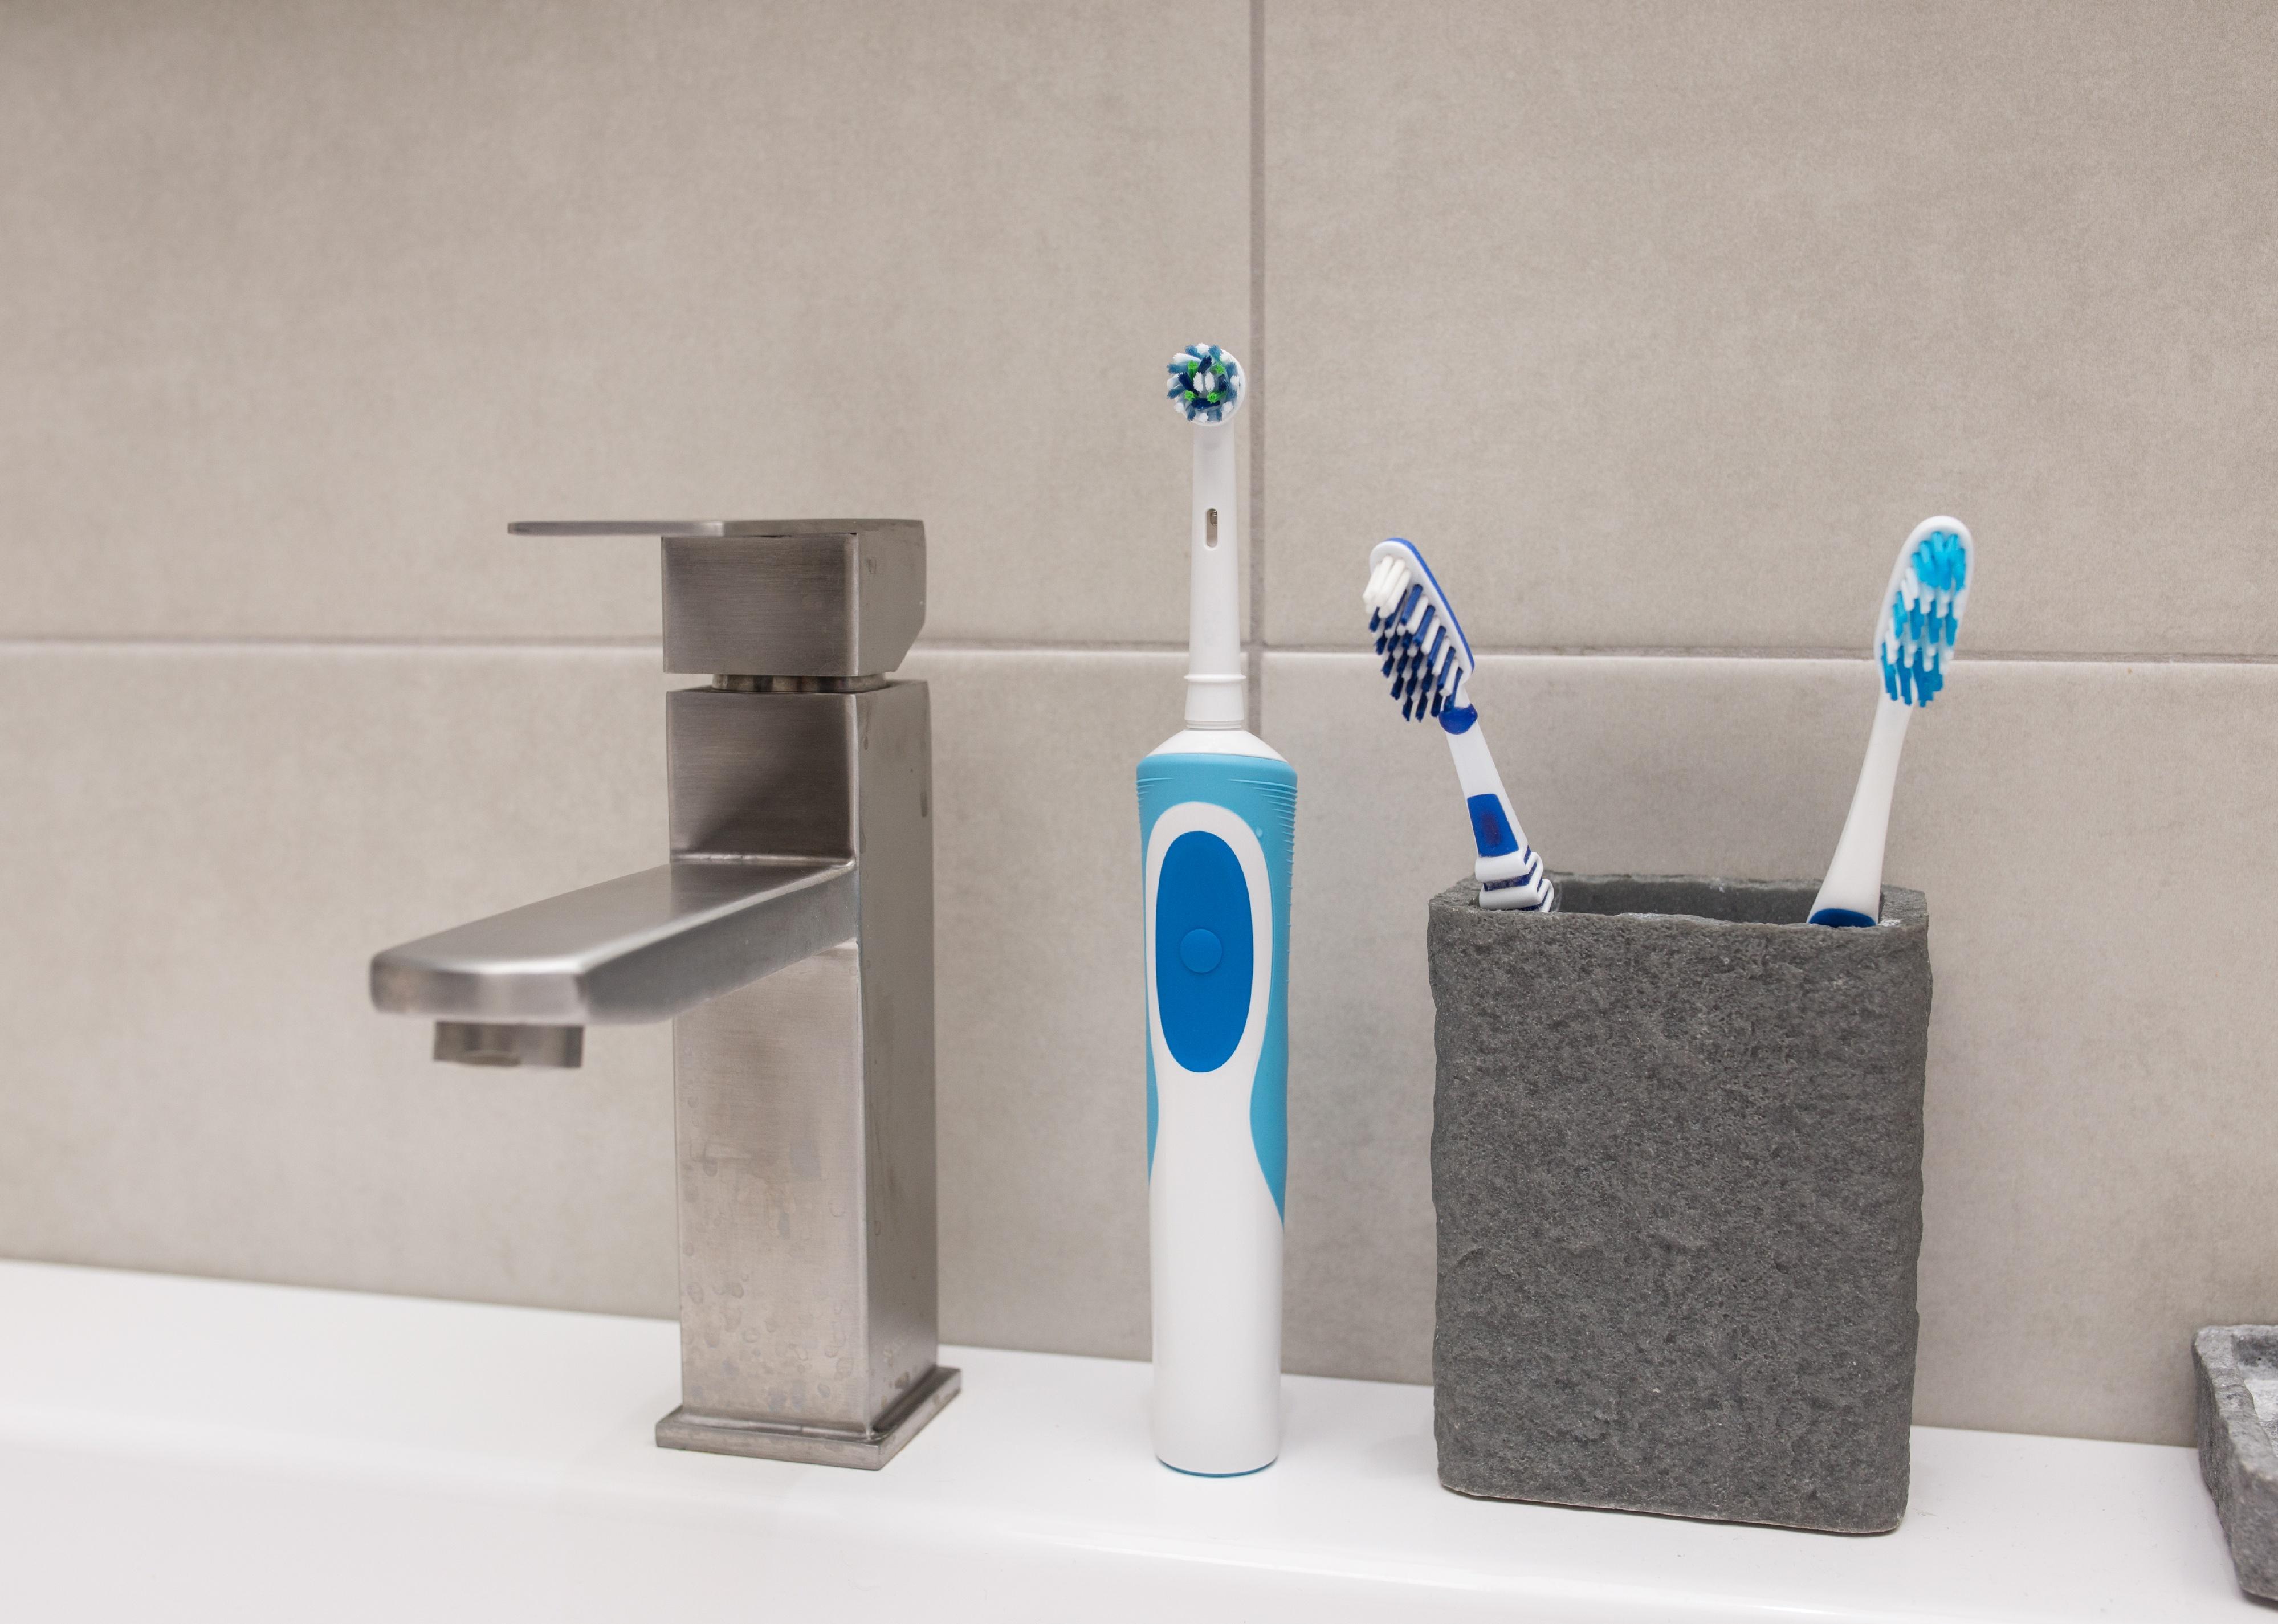 An electric toothbrush and an old toothbrush near the washbasin.